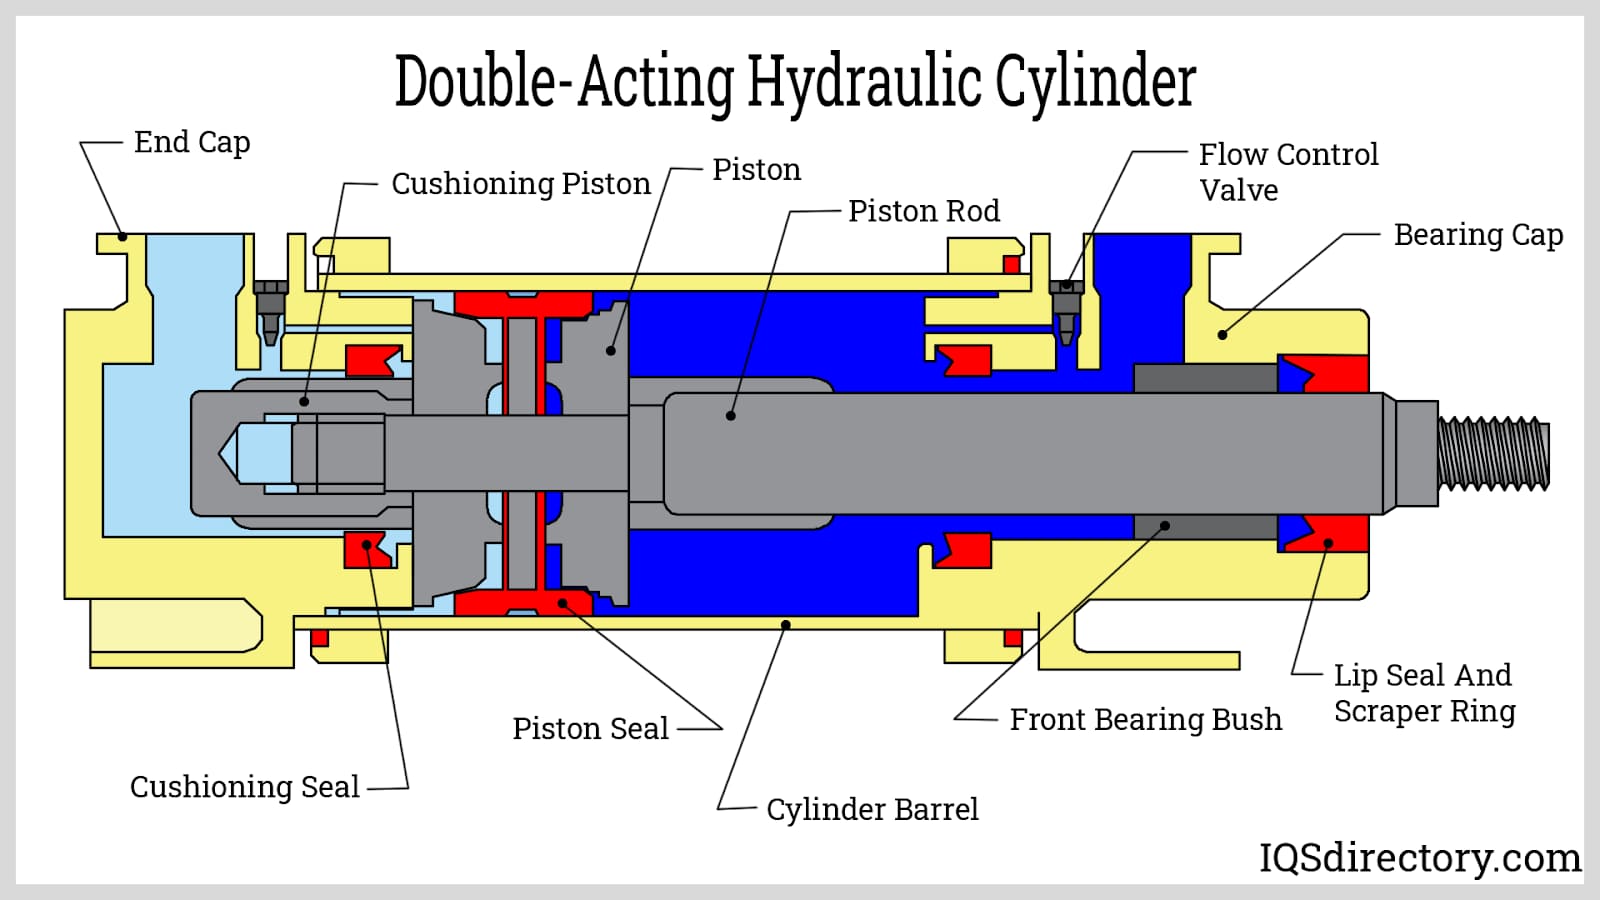 Double-Acting Hydraulic Cylinder